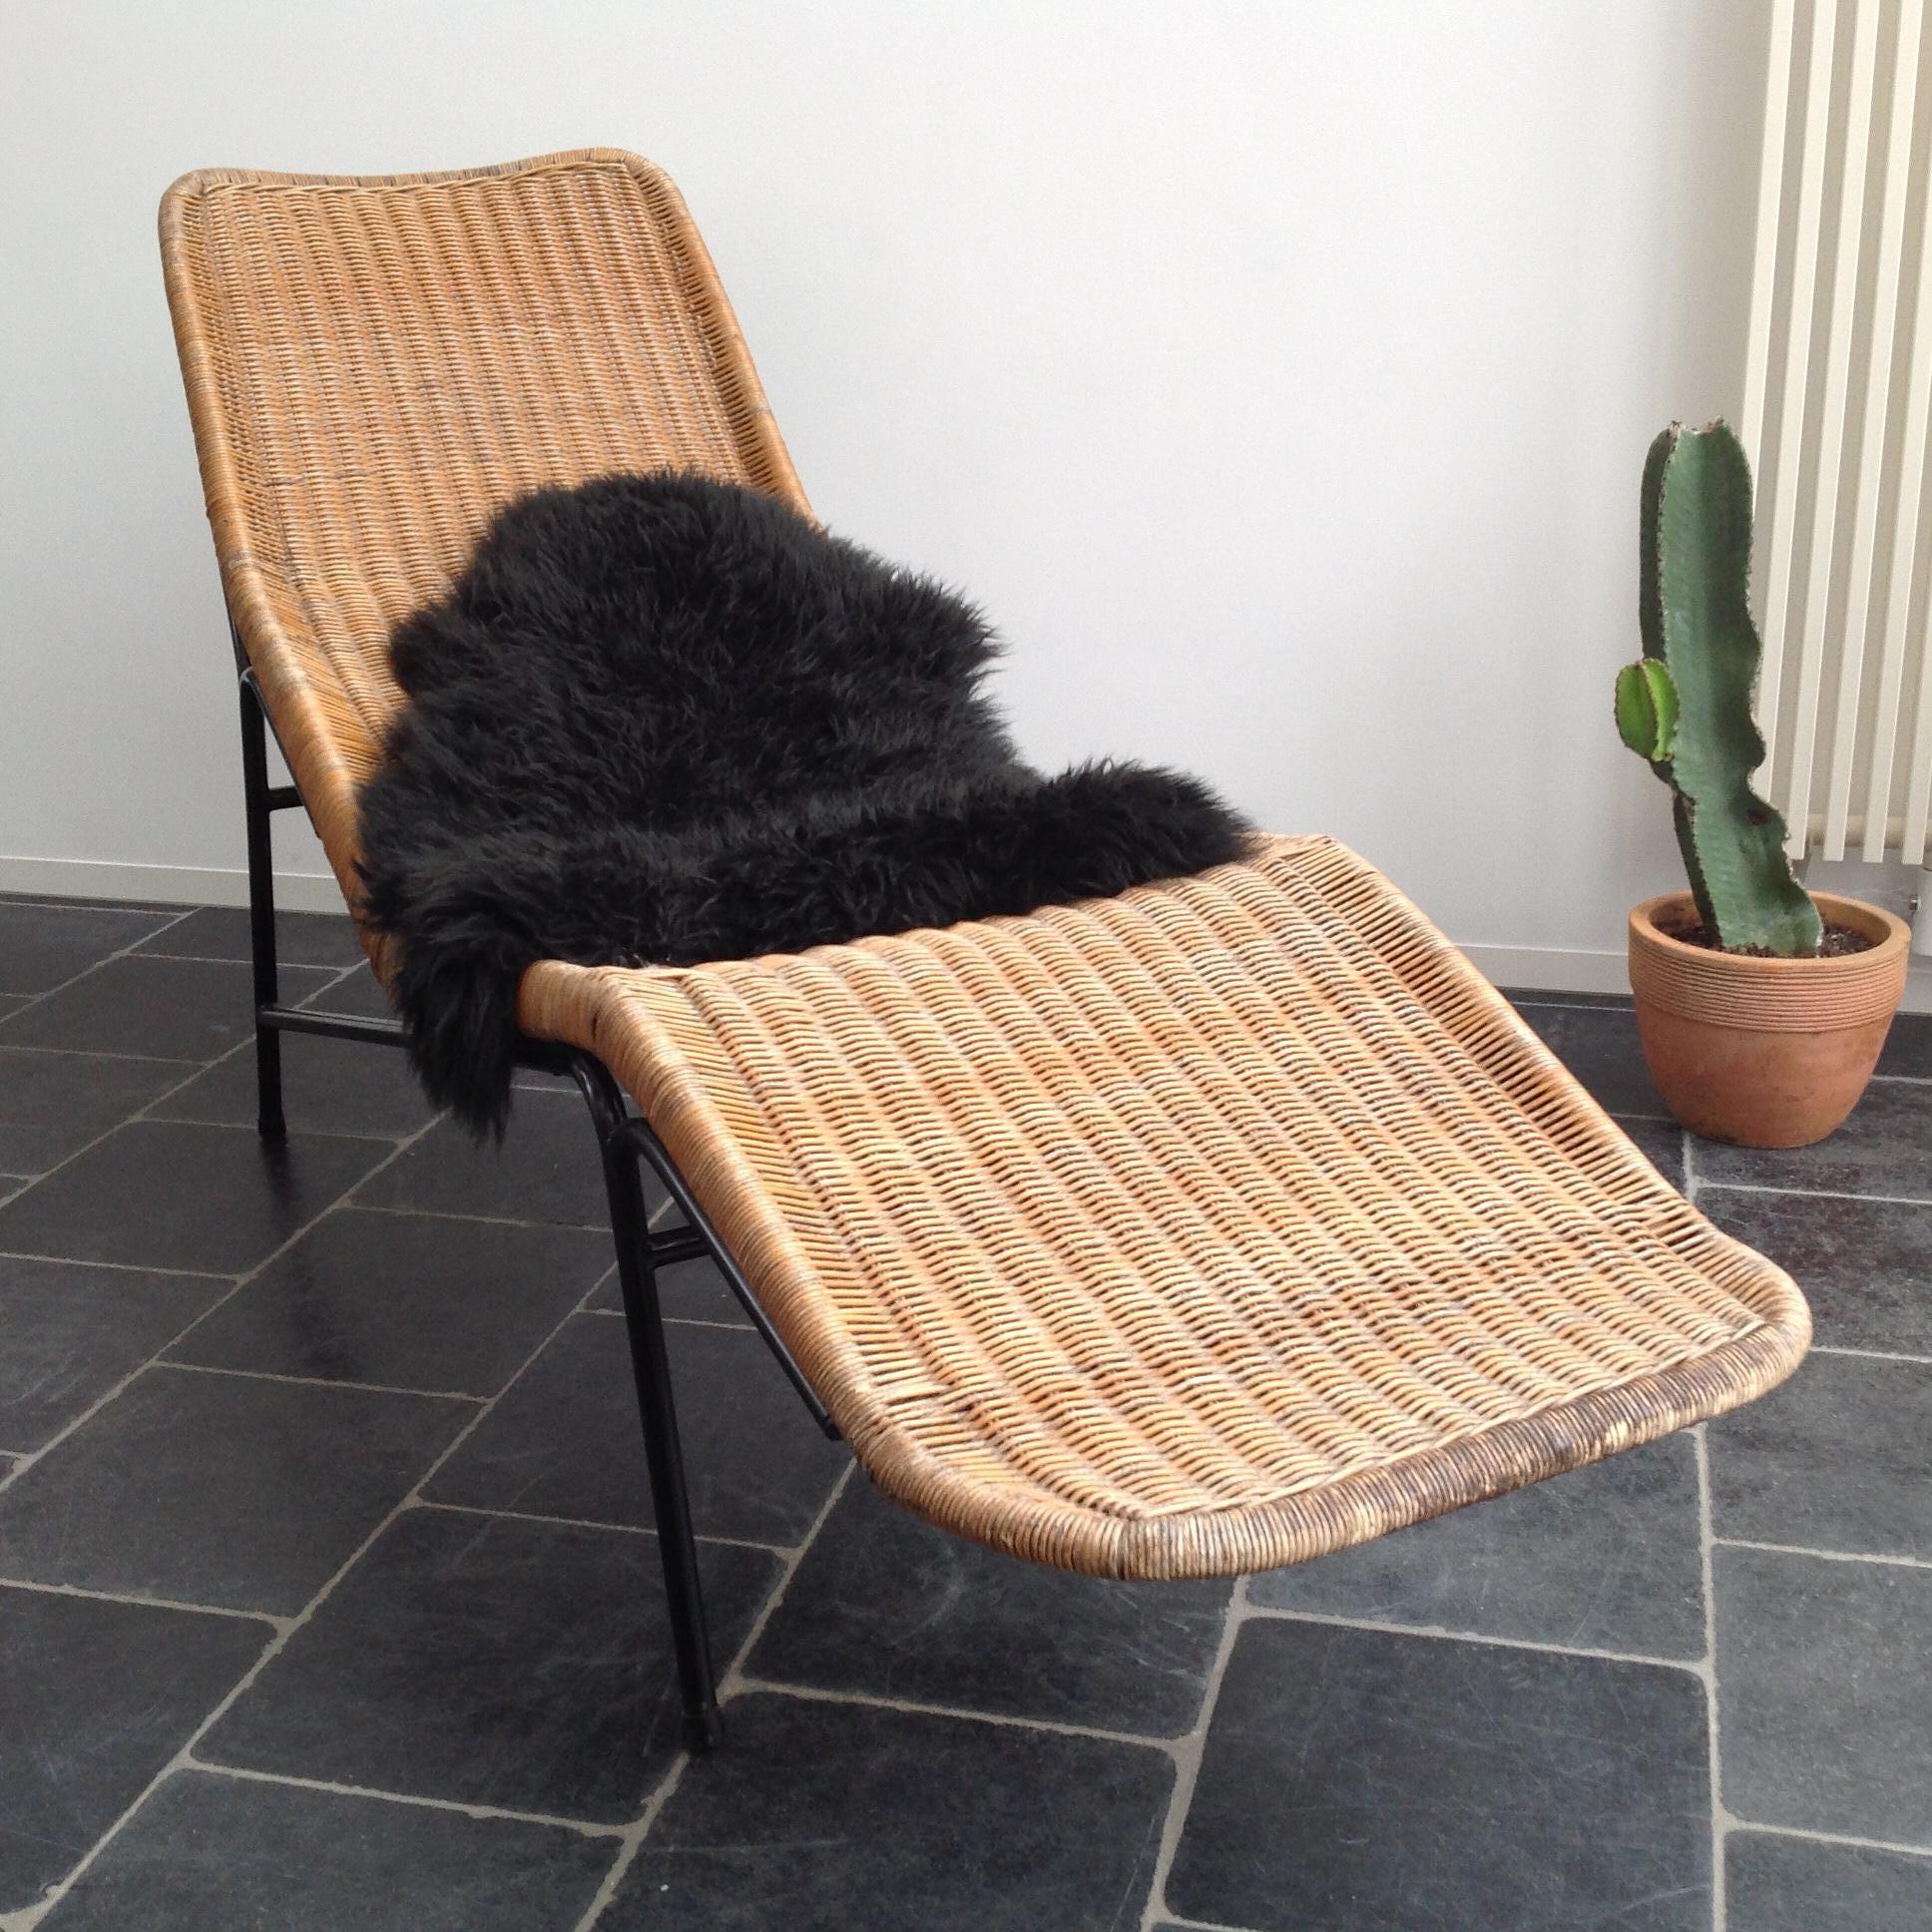 Post-Modern Chaise Longue in Cane, Wicker, Design by Dirk Van Sliedrecht for Rohé, 1960s For Sale